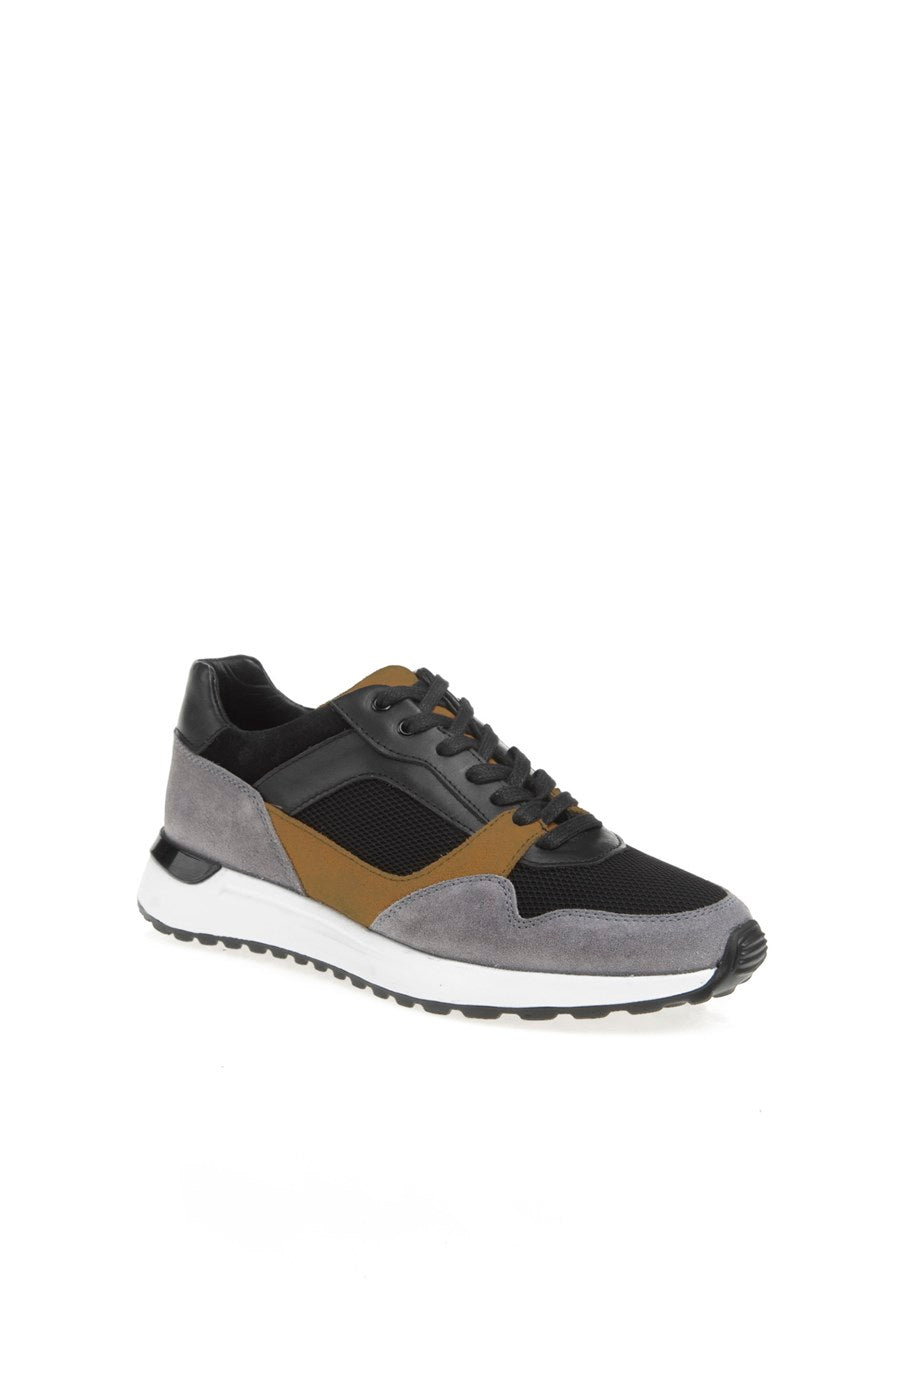 Eva Sole Genuine Leather Sports Shoes - MENSTYLEWITH